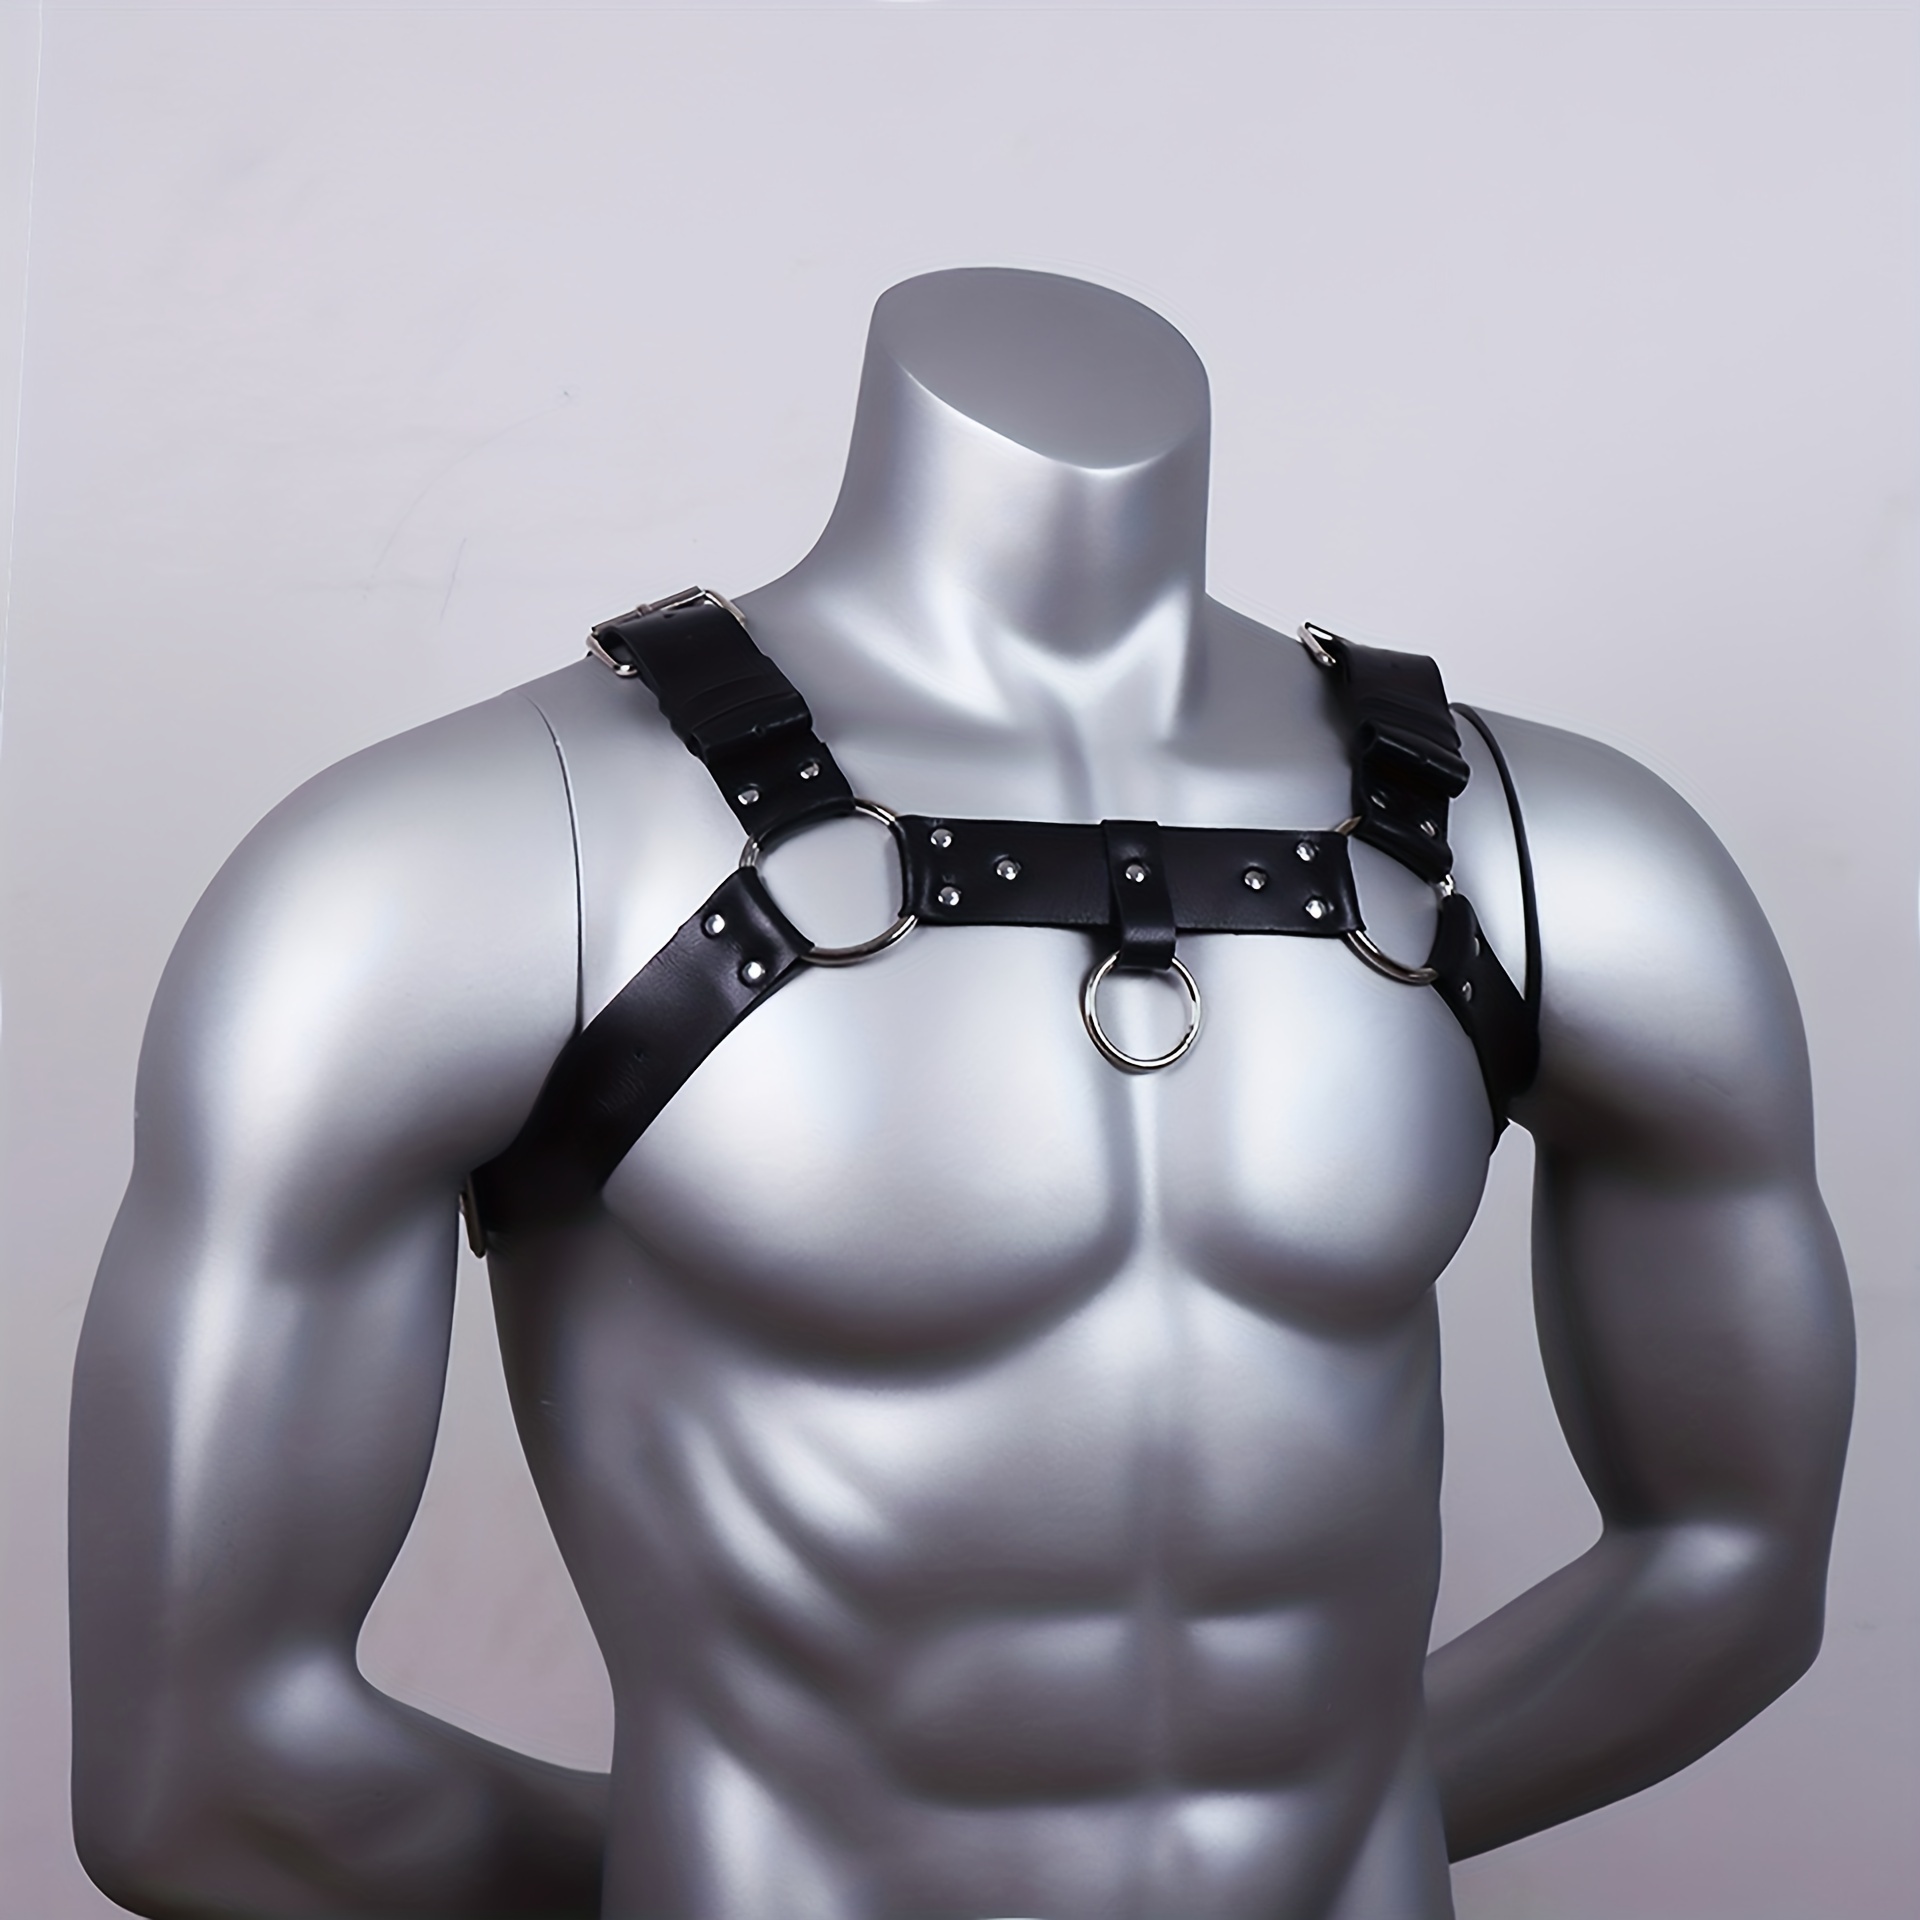 Men Bdsm leather body straps Gay harness Fashion cock harness Chest Strap  Clubwear Restraints sex clothes for men - AliExpress